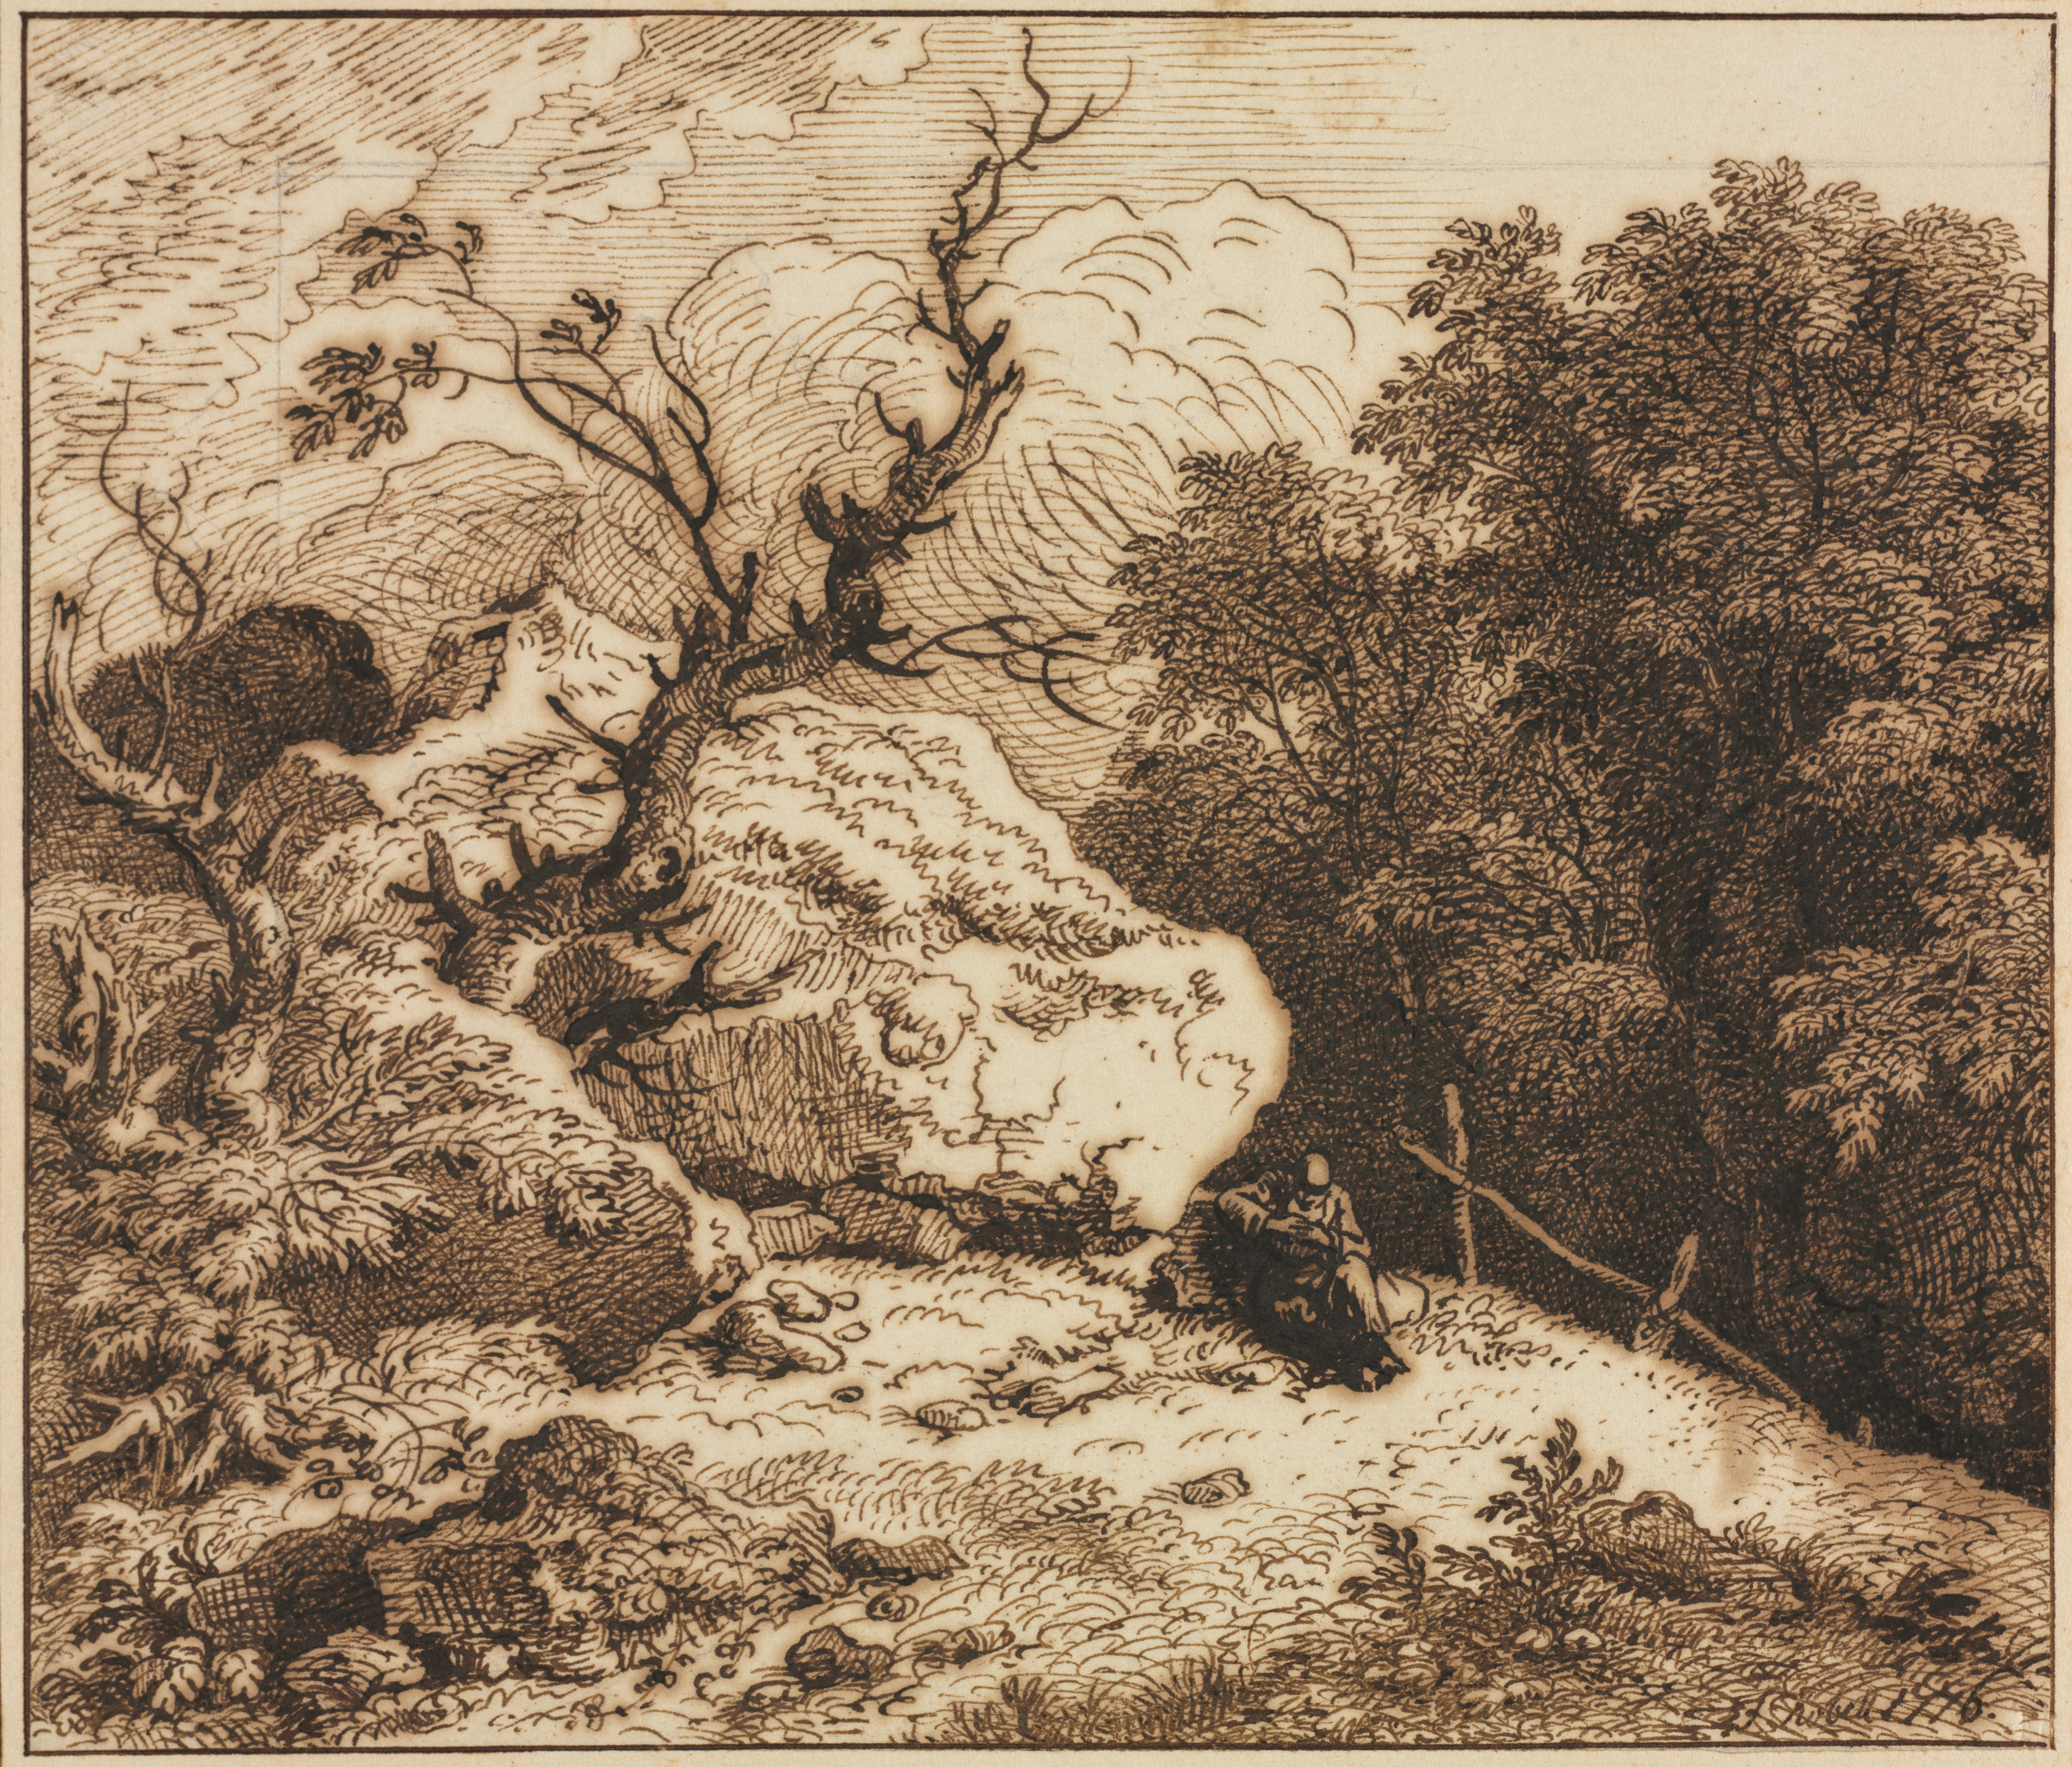 Hermit in a Wooded Landscape